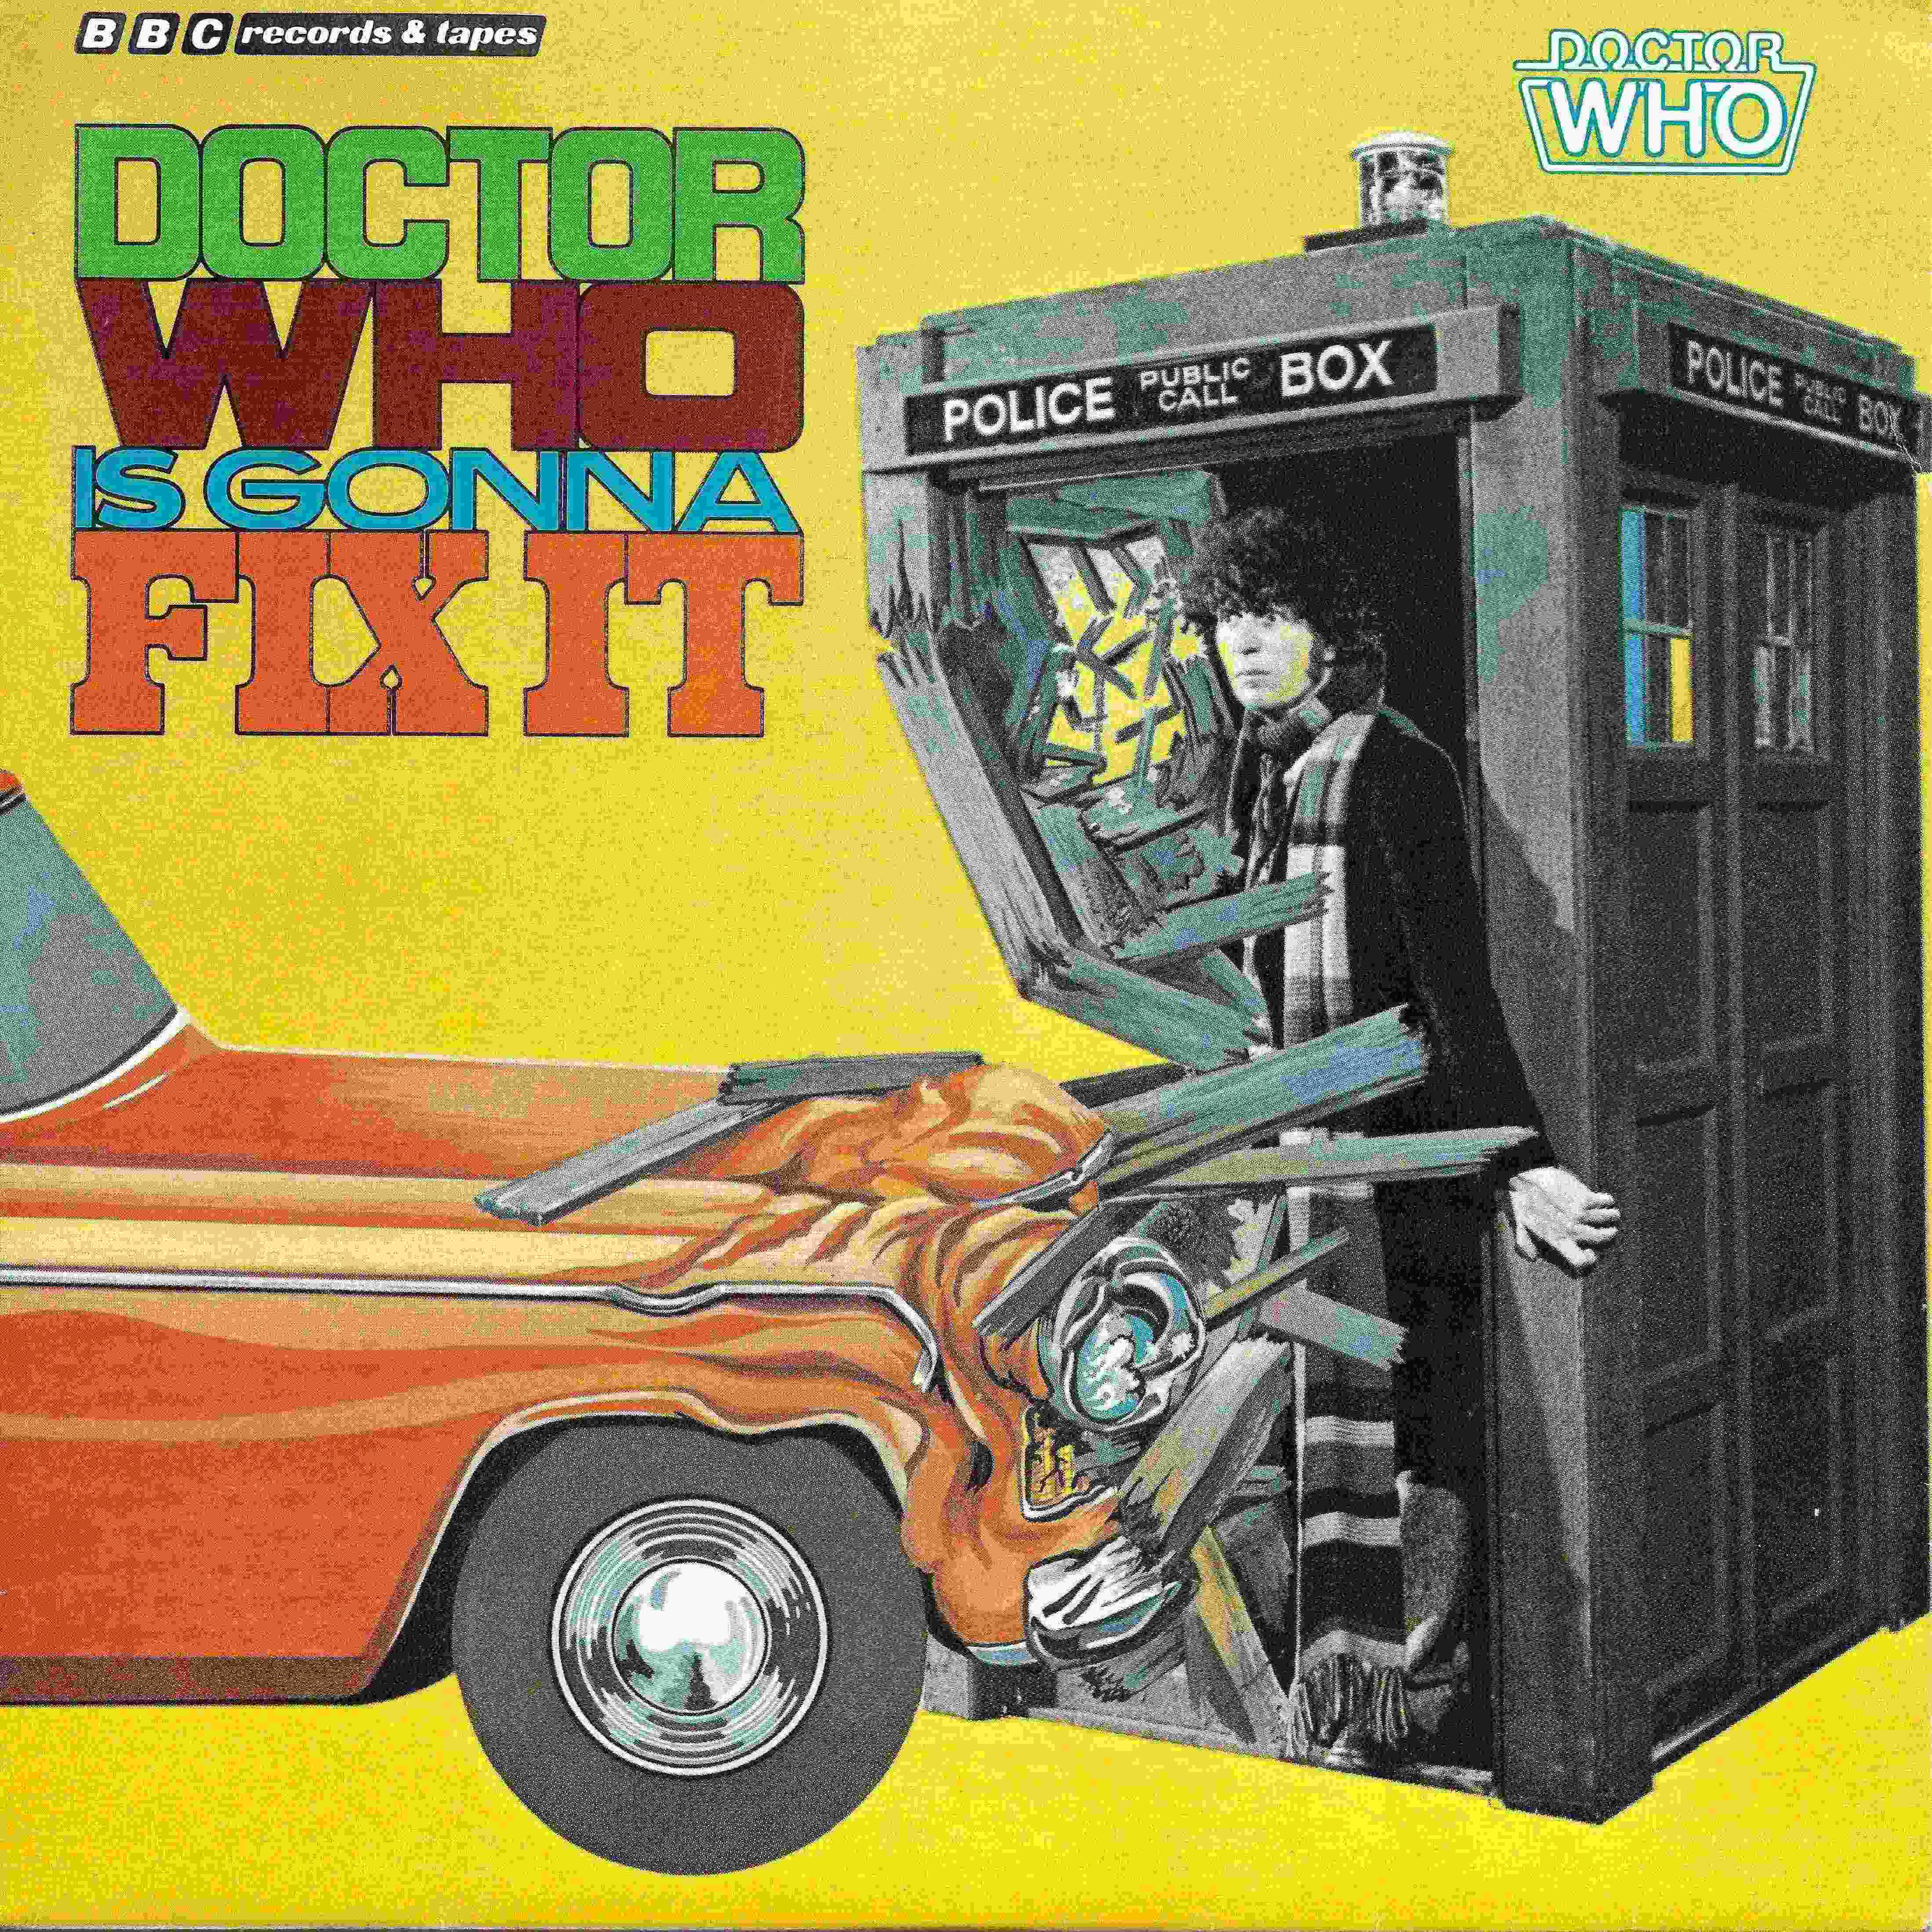 Picture of BBC - 454 Doctor who is gonna fix it by artist Bullamakanka from the BBC singles - Records and Tapes library